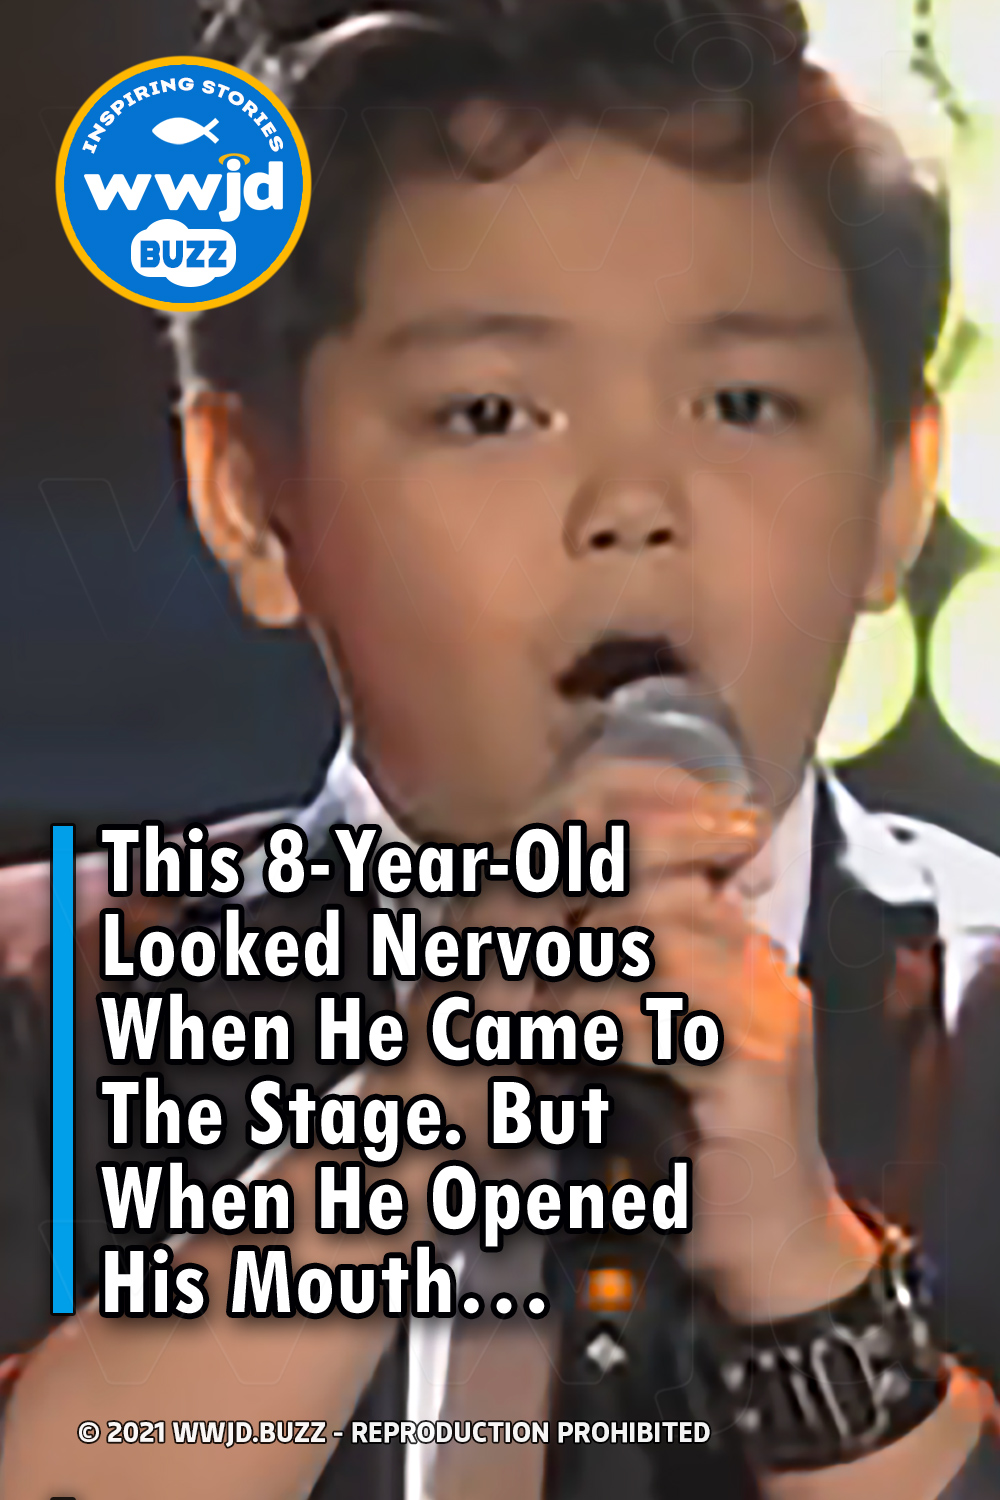 This 8-Year-Old Looked Nervous When He Came To The Stage. But When He Opened His Mouth...